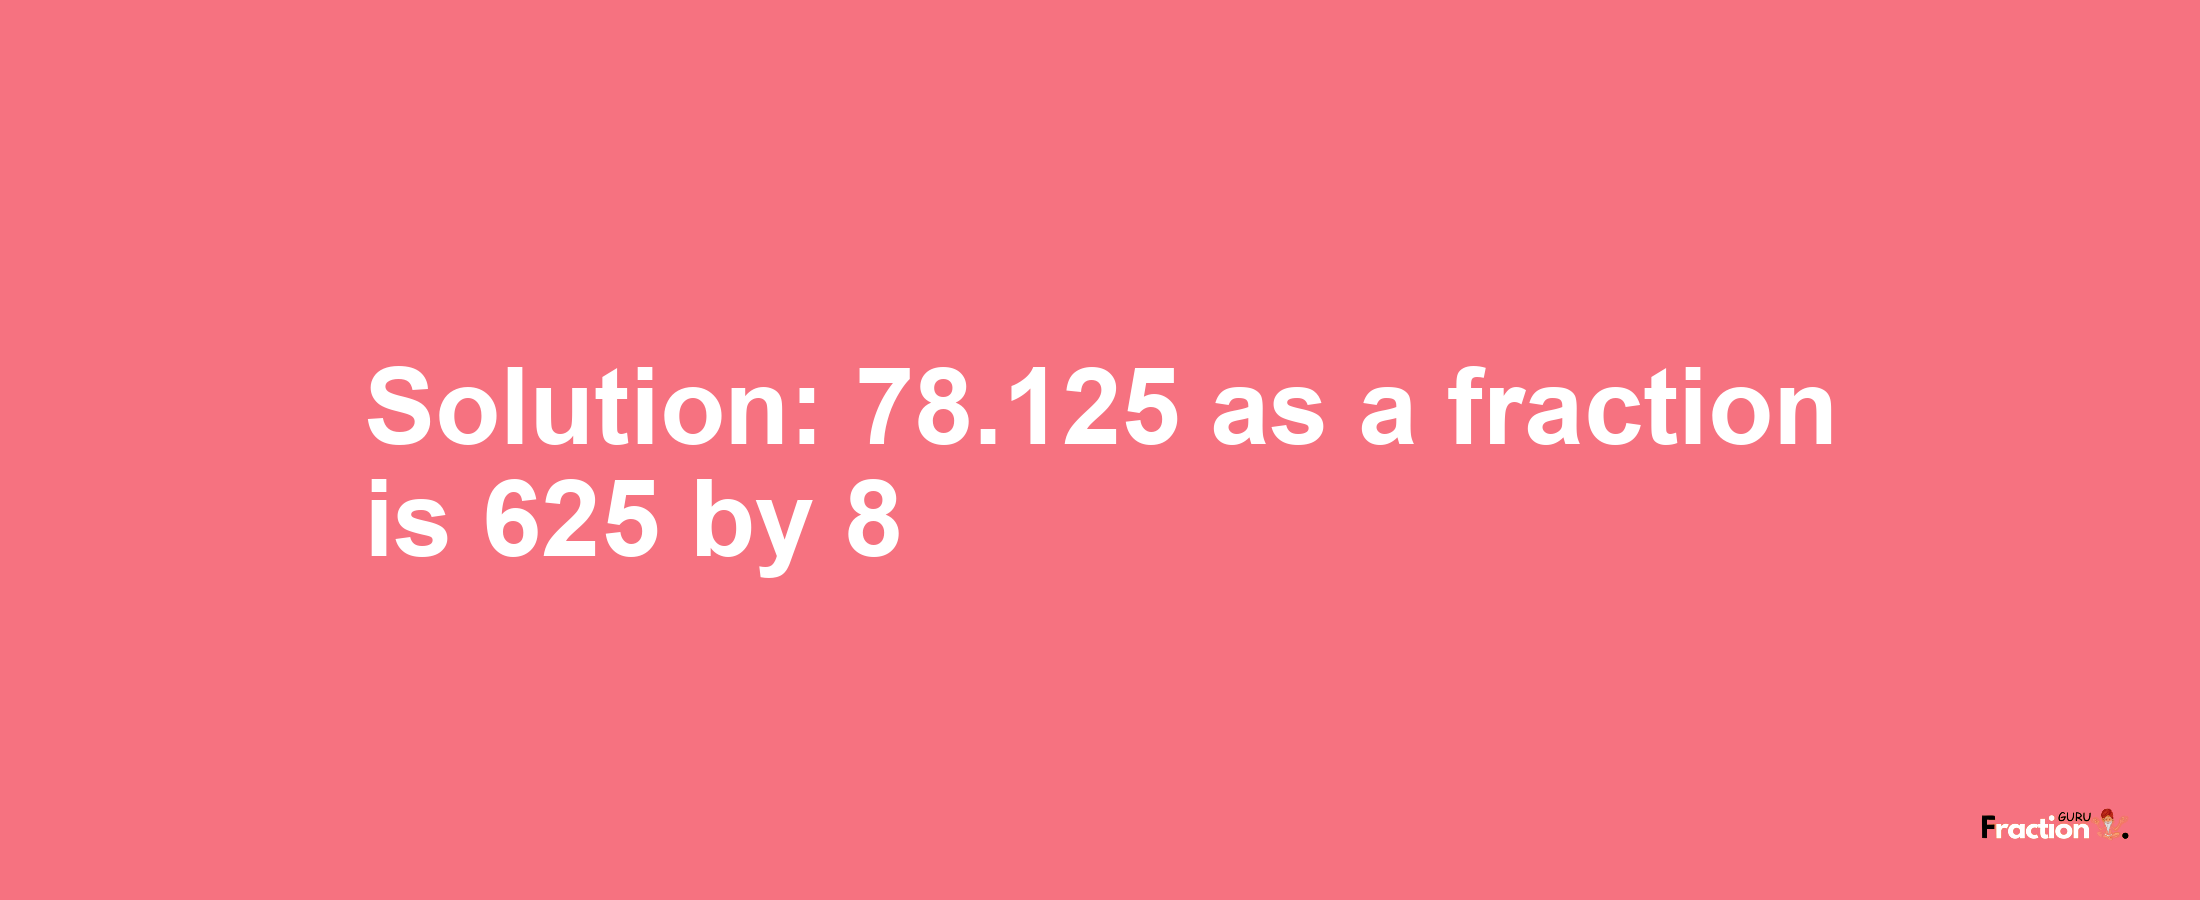 Solution:78.125 as a fraction is 625/8